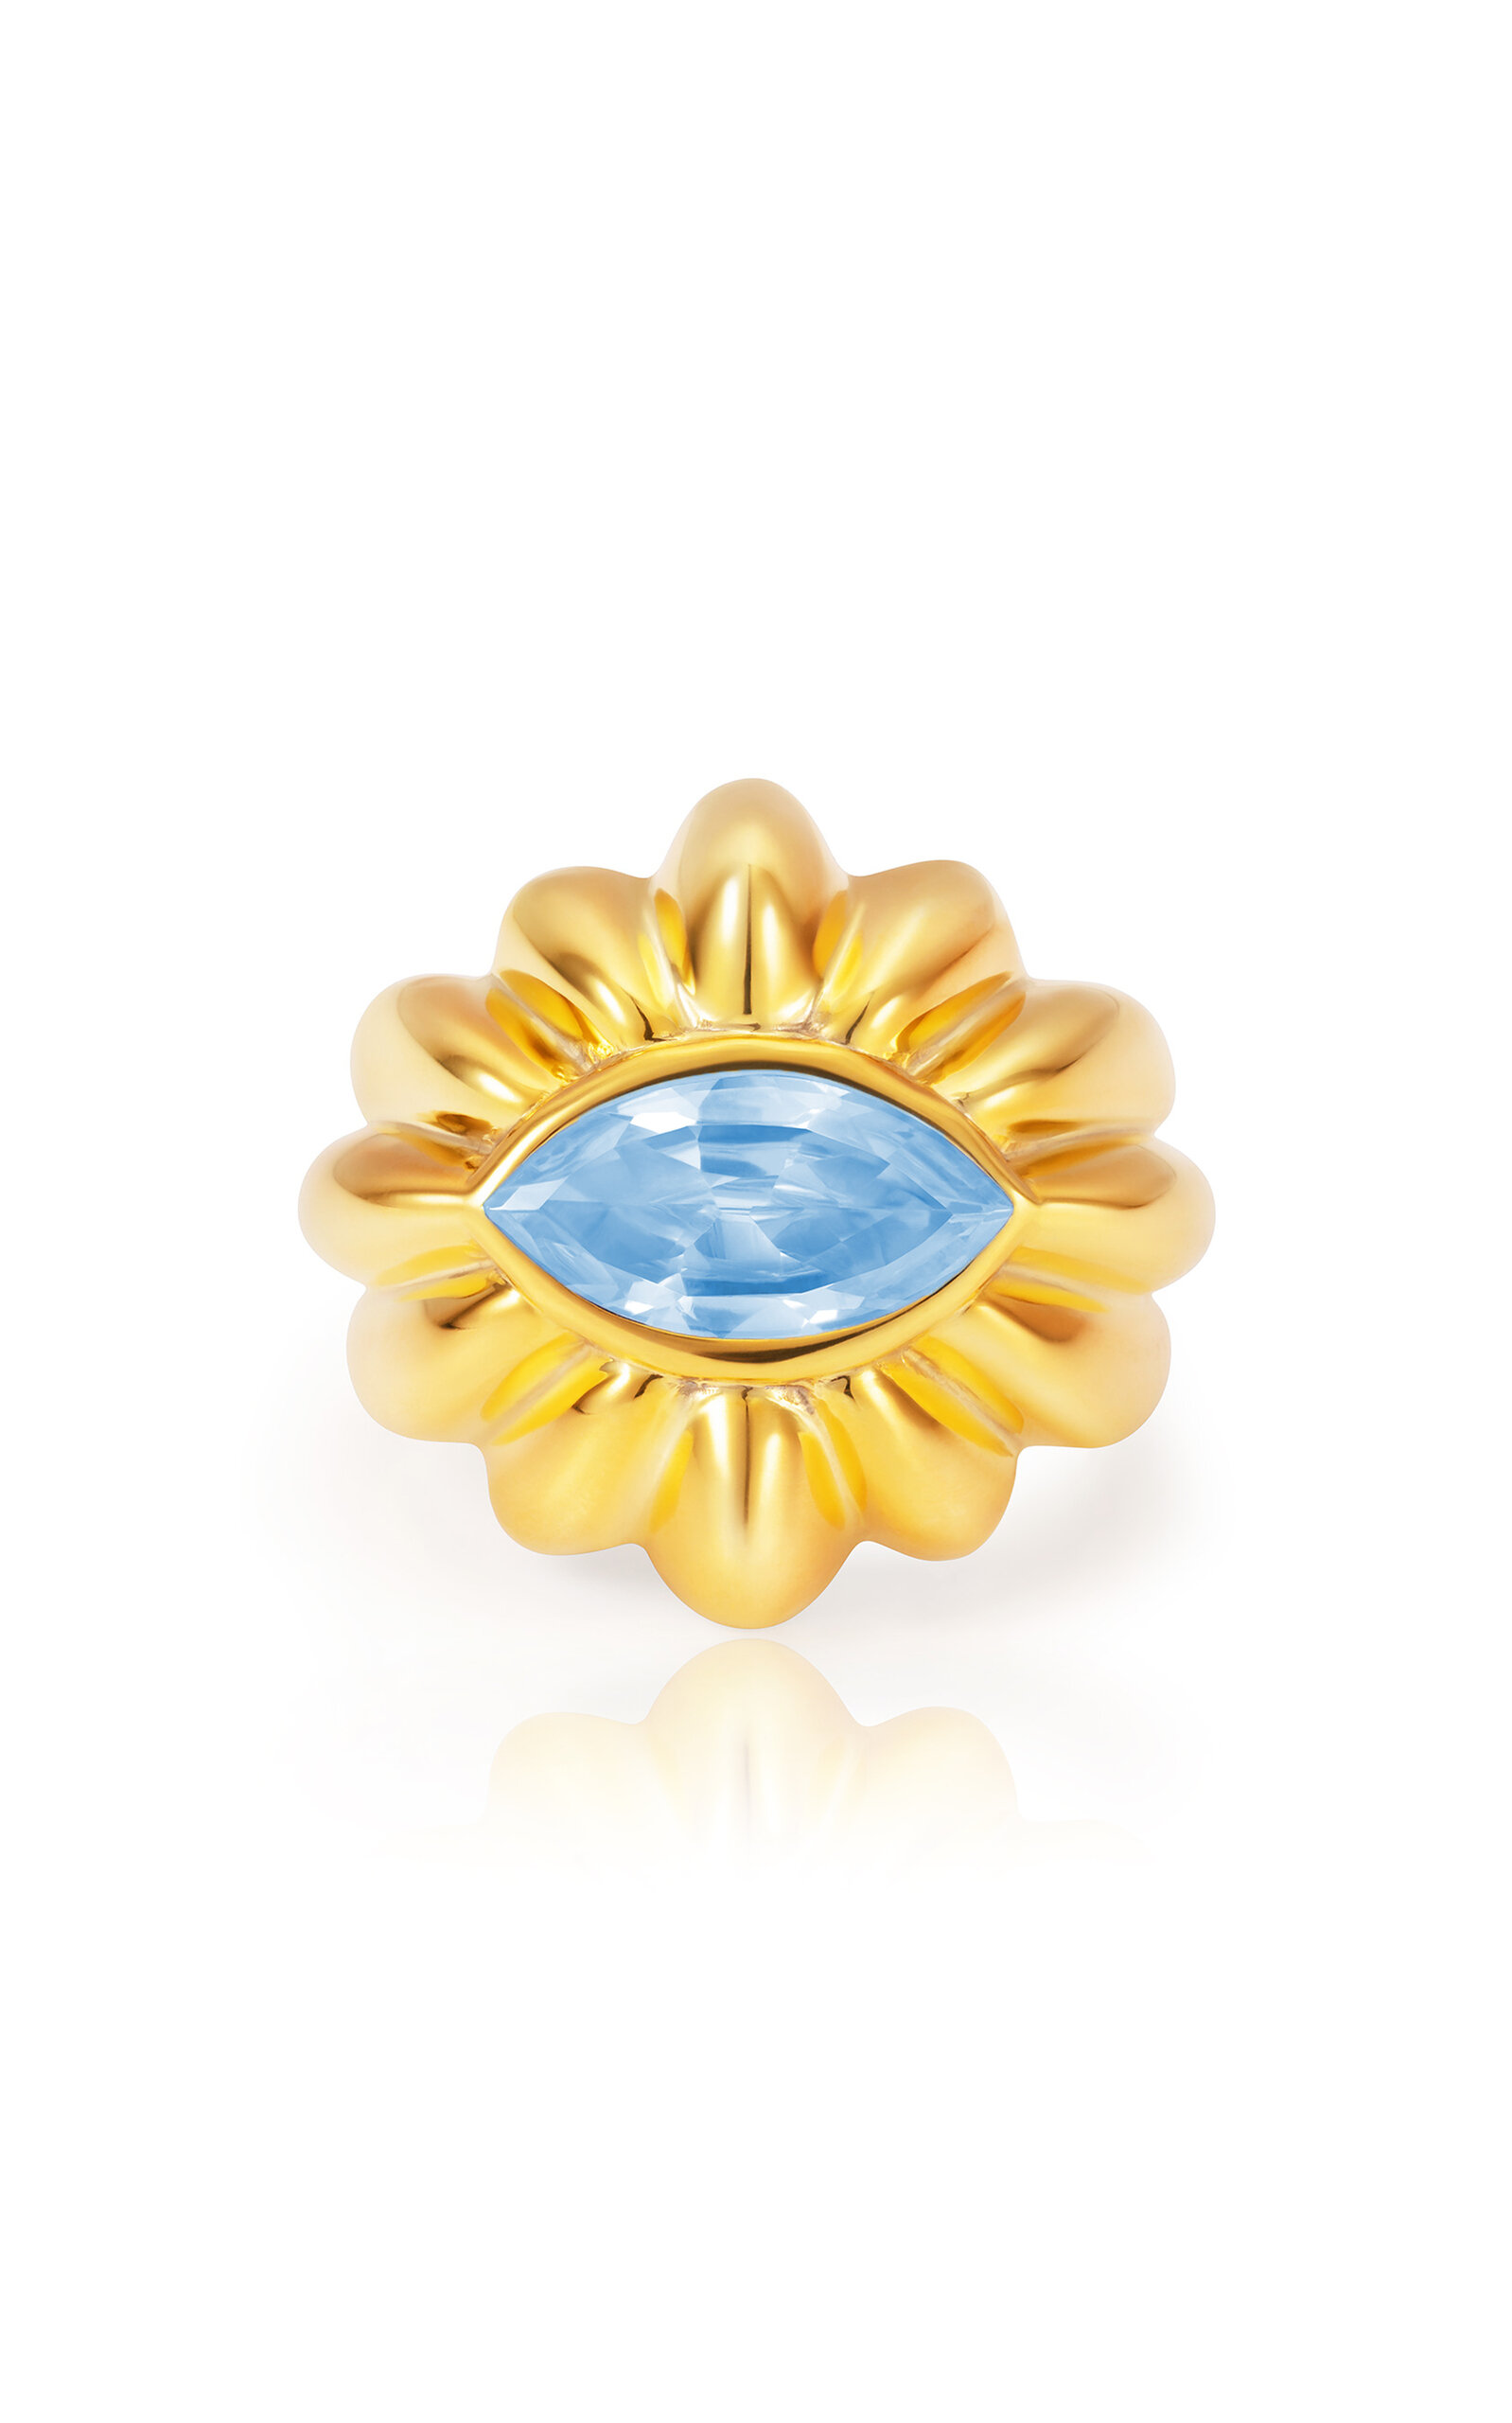 Let's Watch the Sunset 18K Yellow Gold Topaz Ring